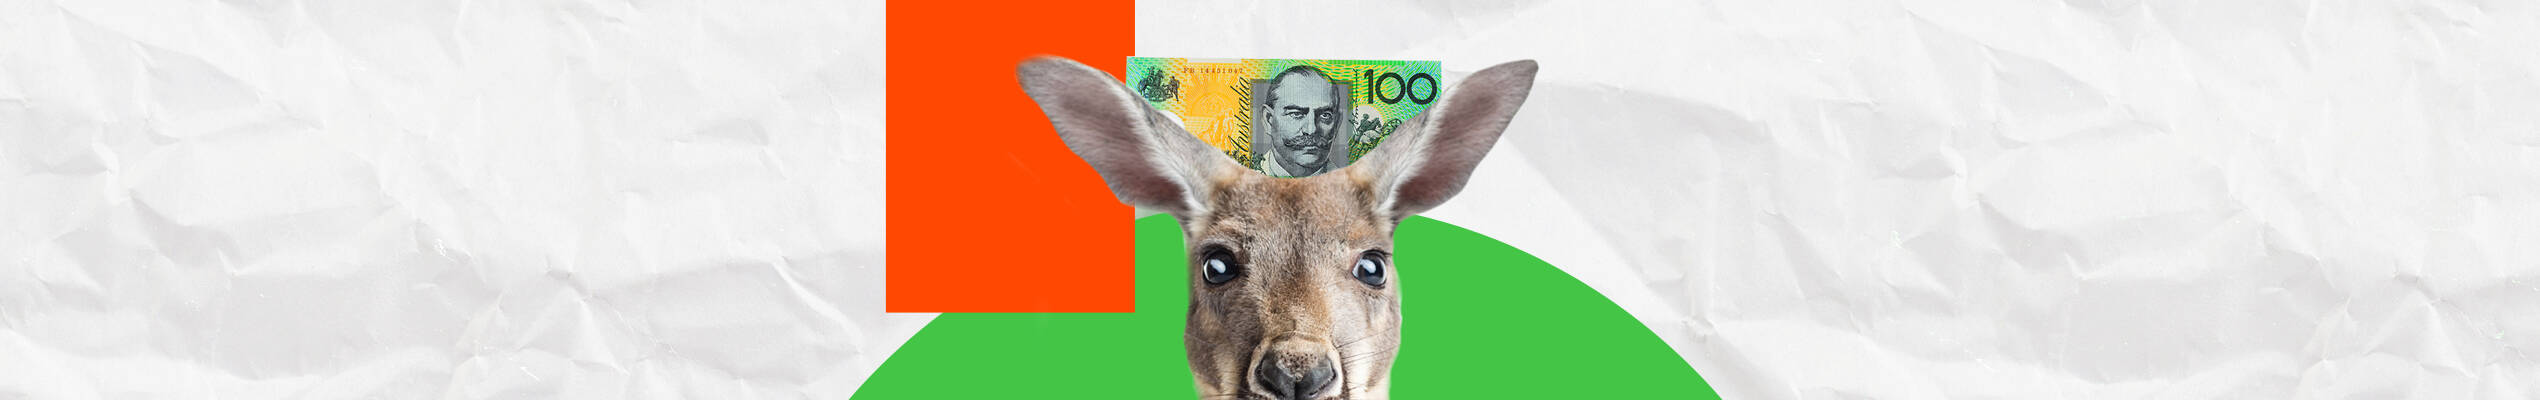 AUD/USD: ready to rise?